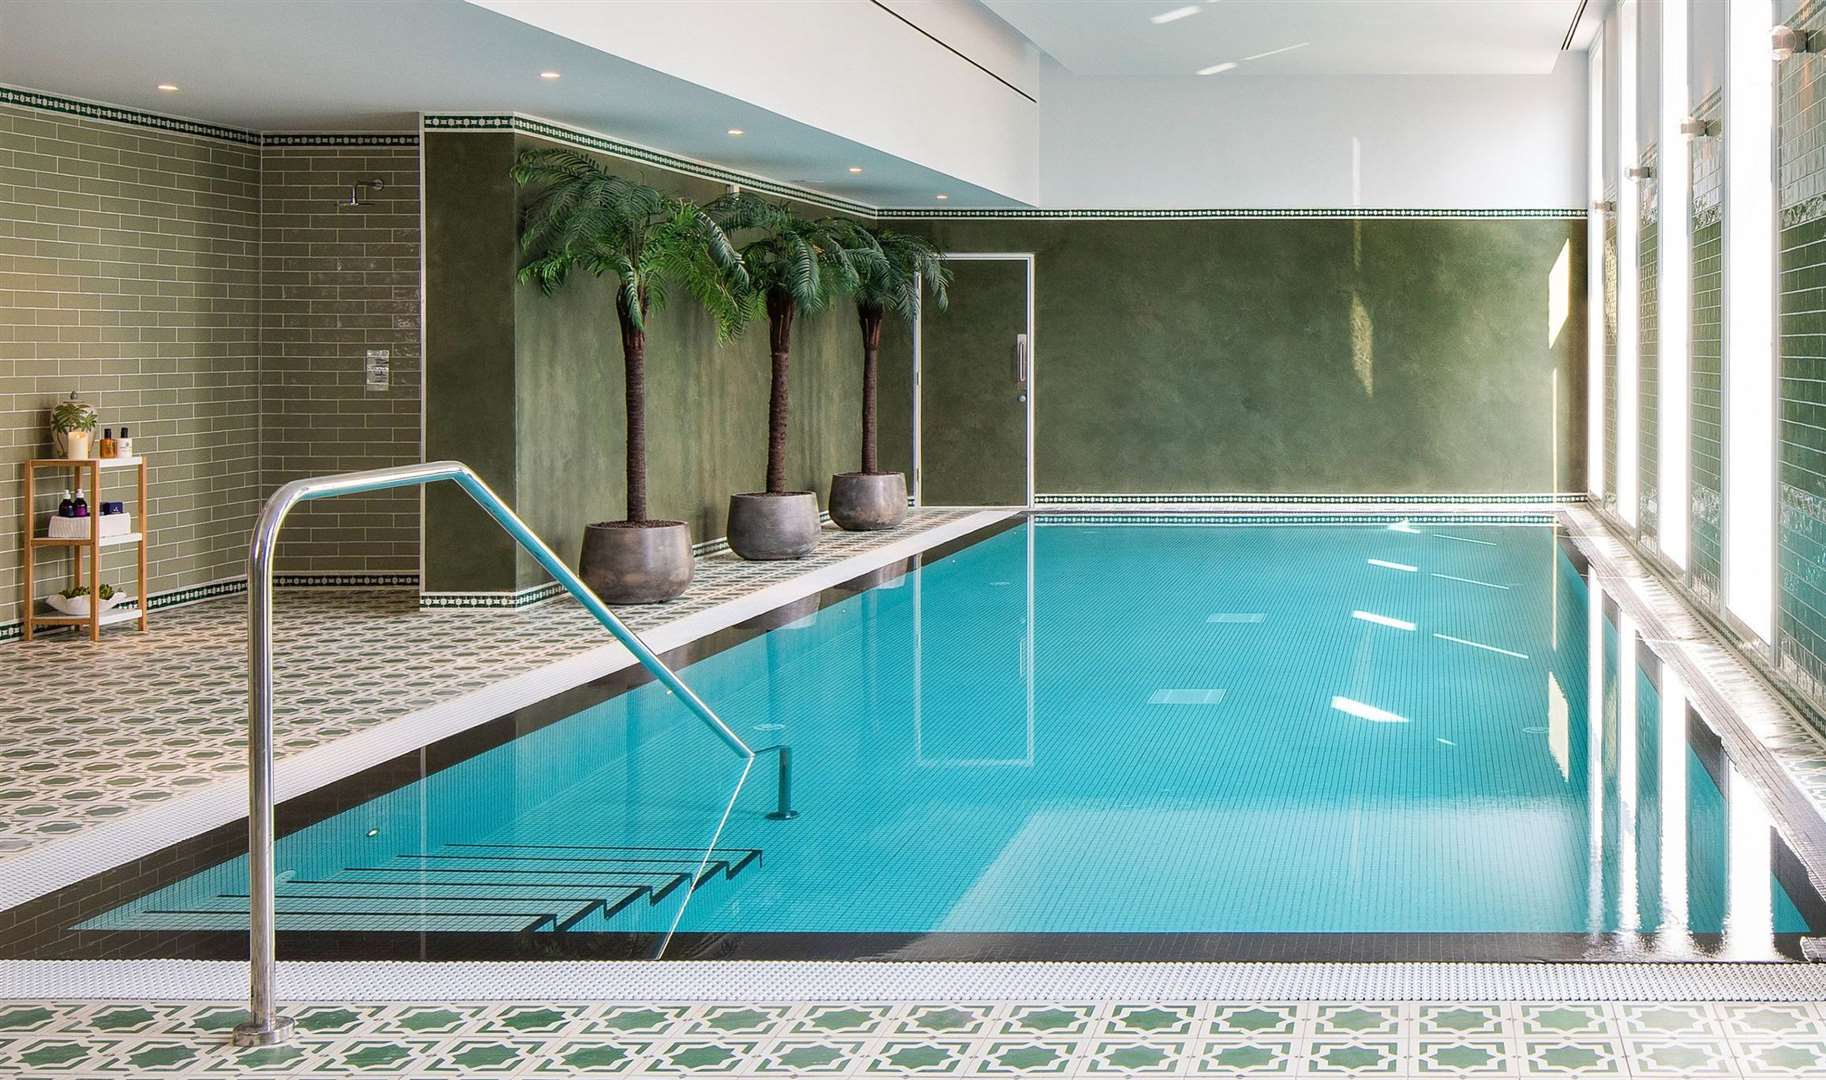 Residents can take a dip in the shared swimming pool. Picture: Maison